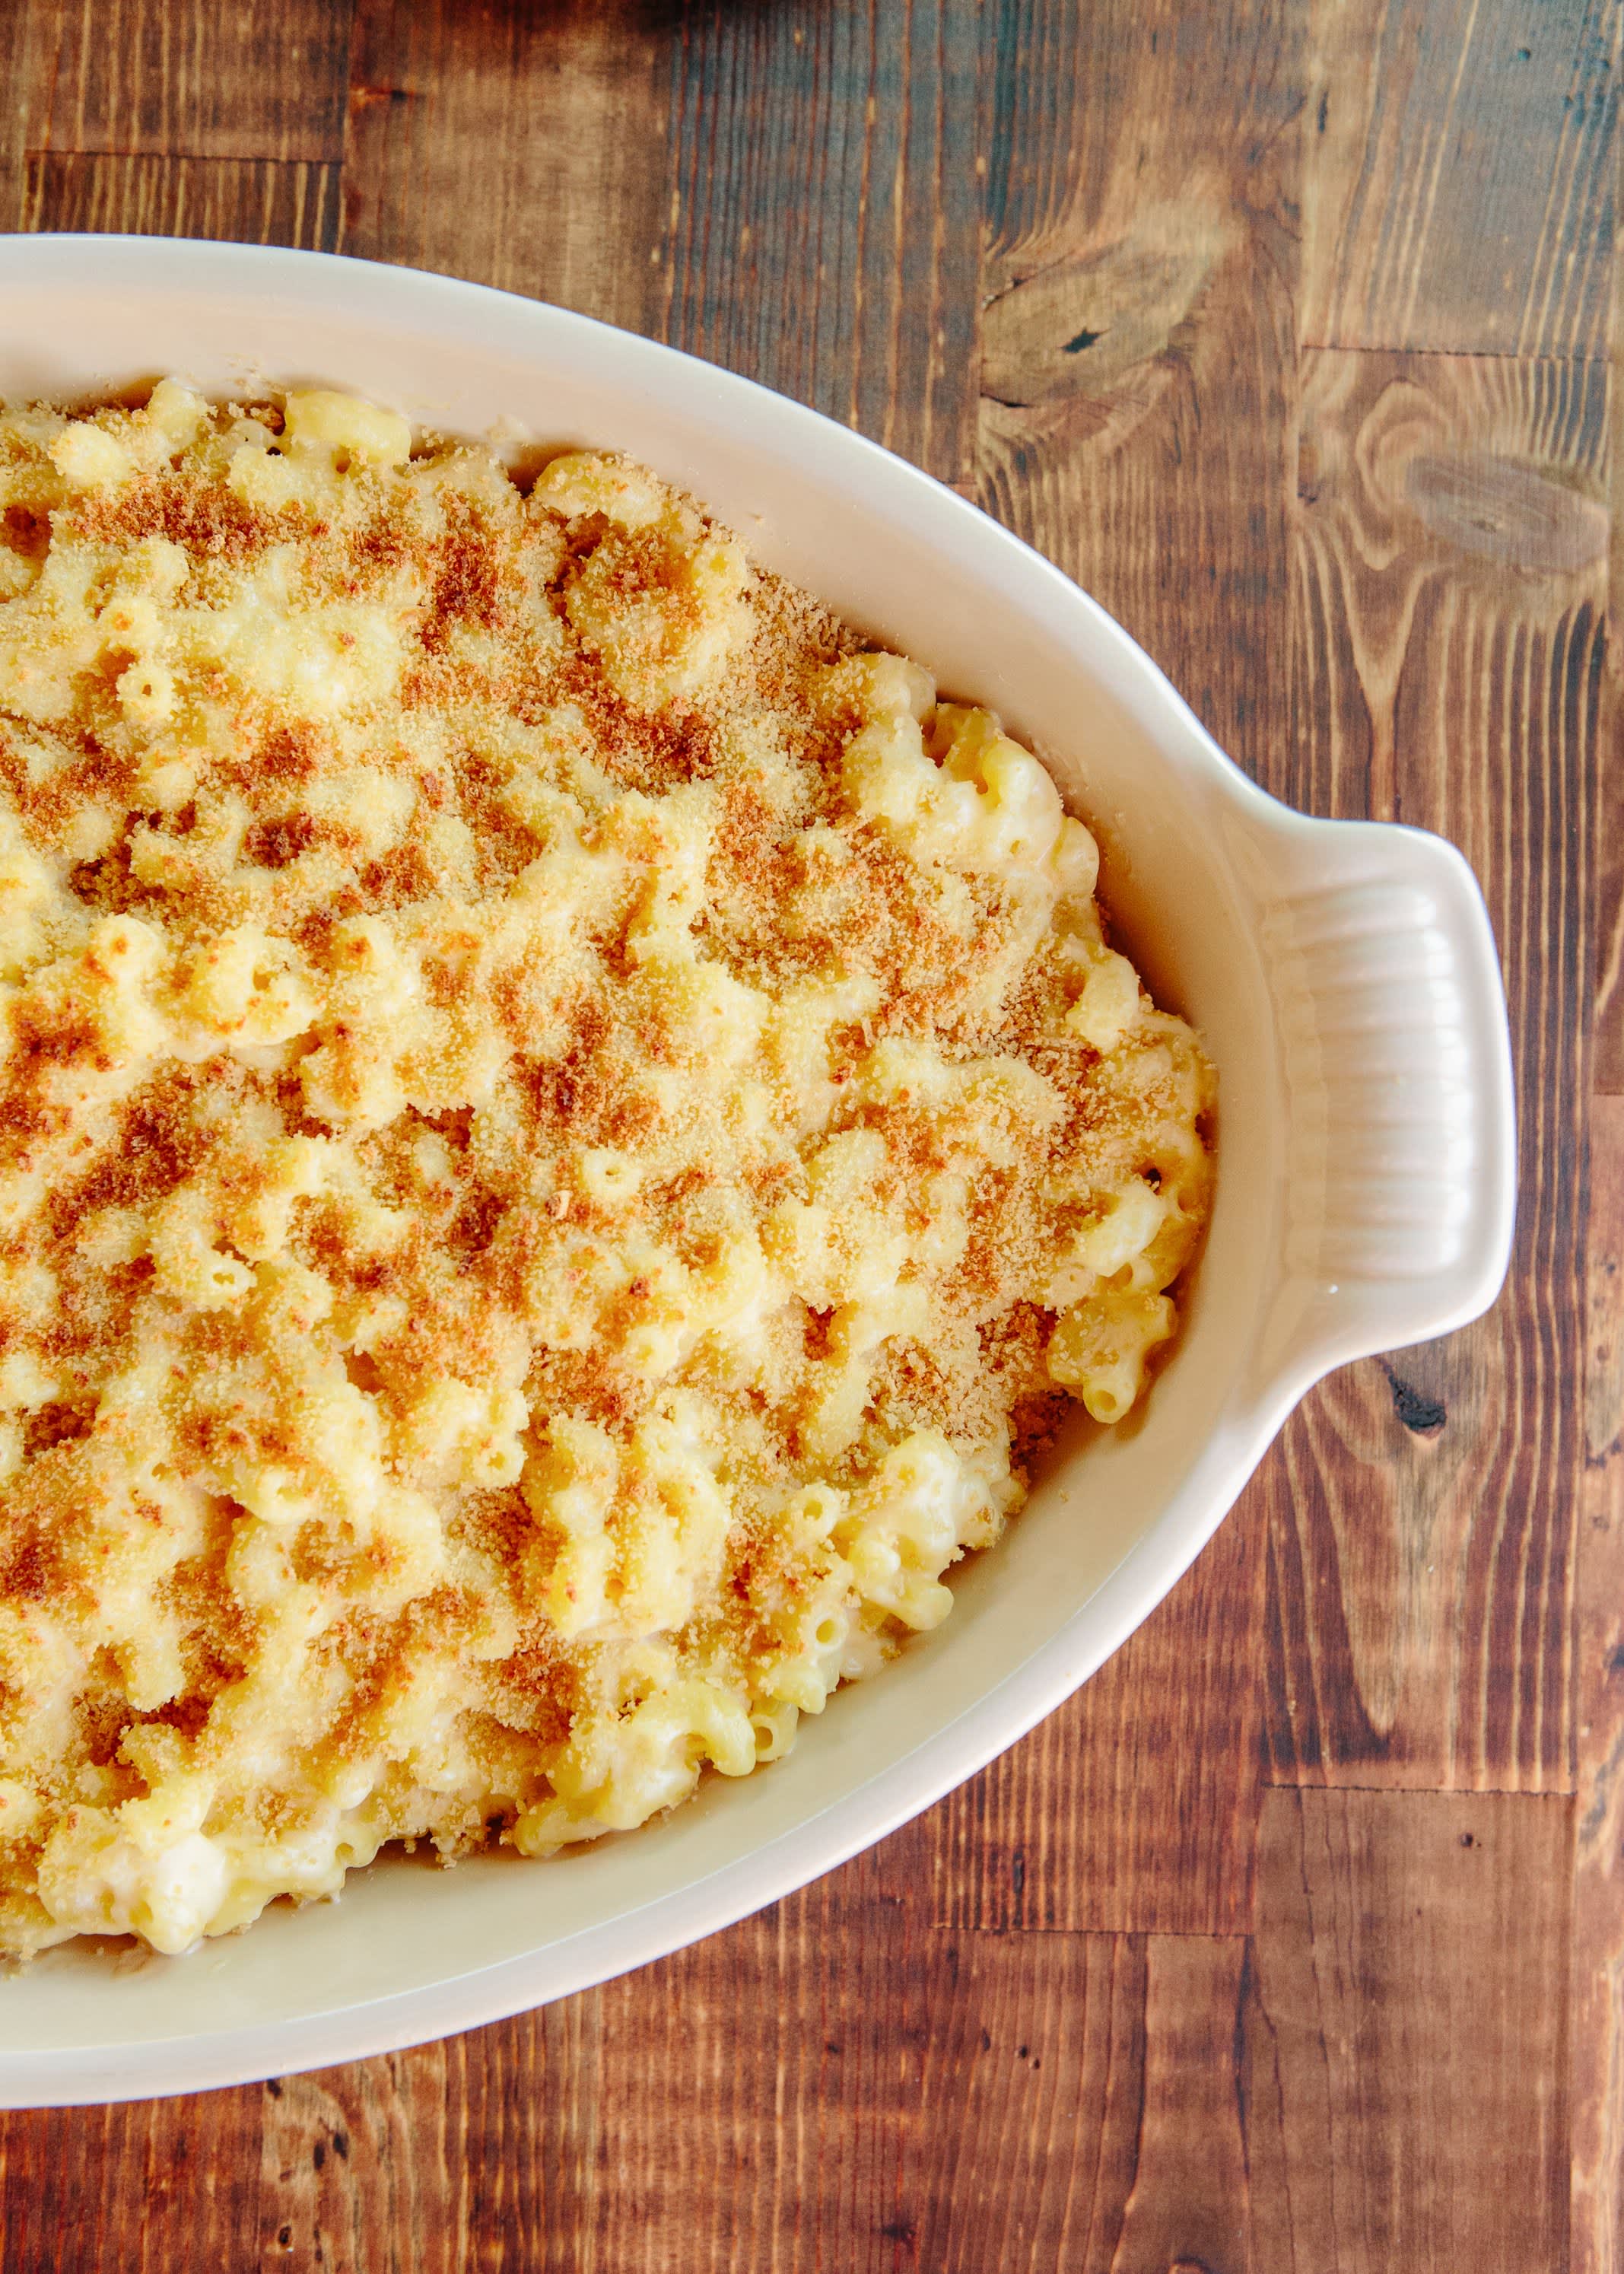 How To Make Classic Baked Macaroni & Cheese | Kitchn